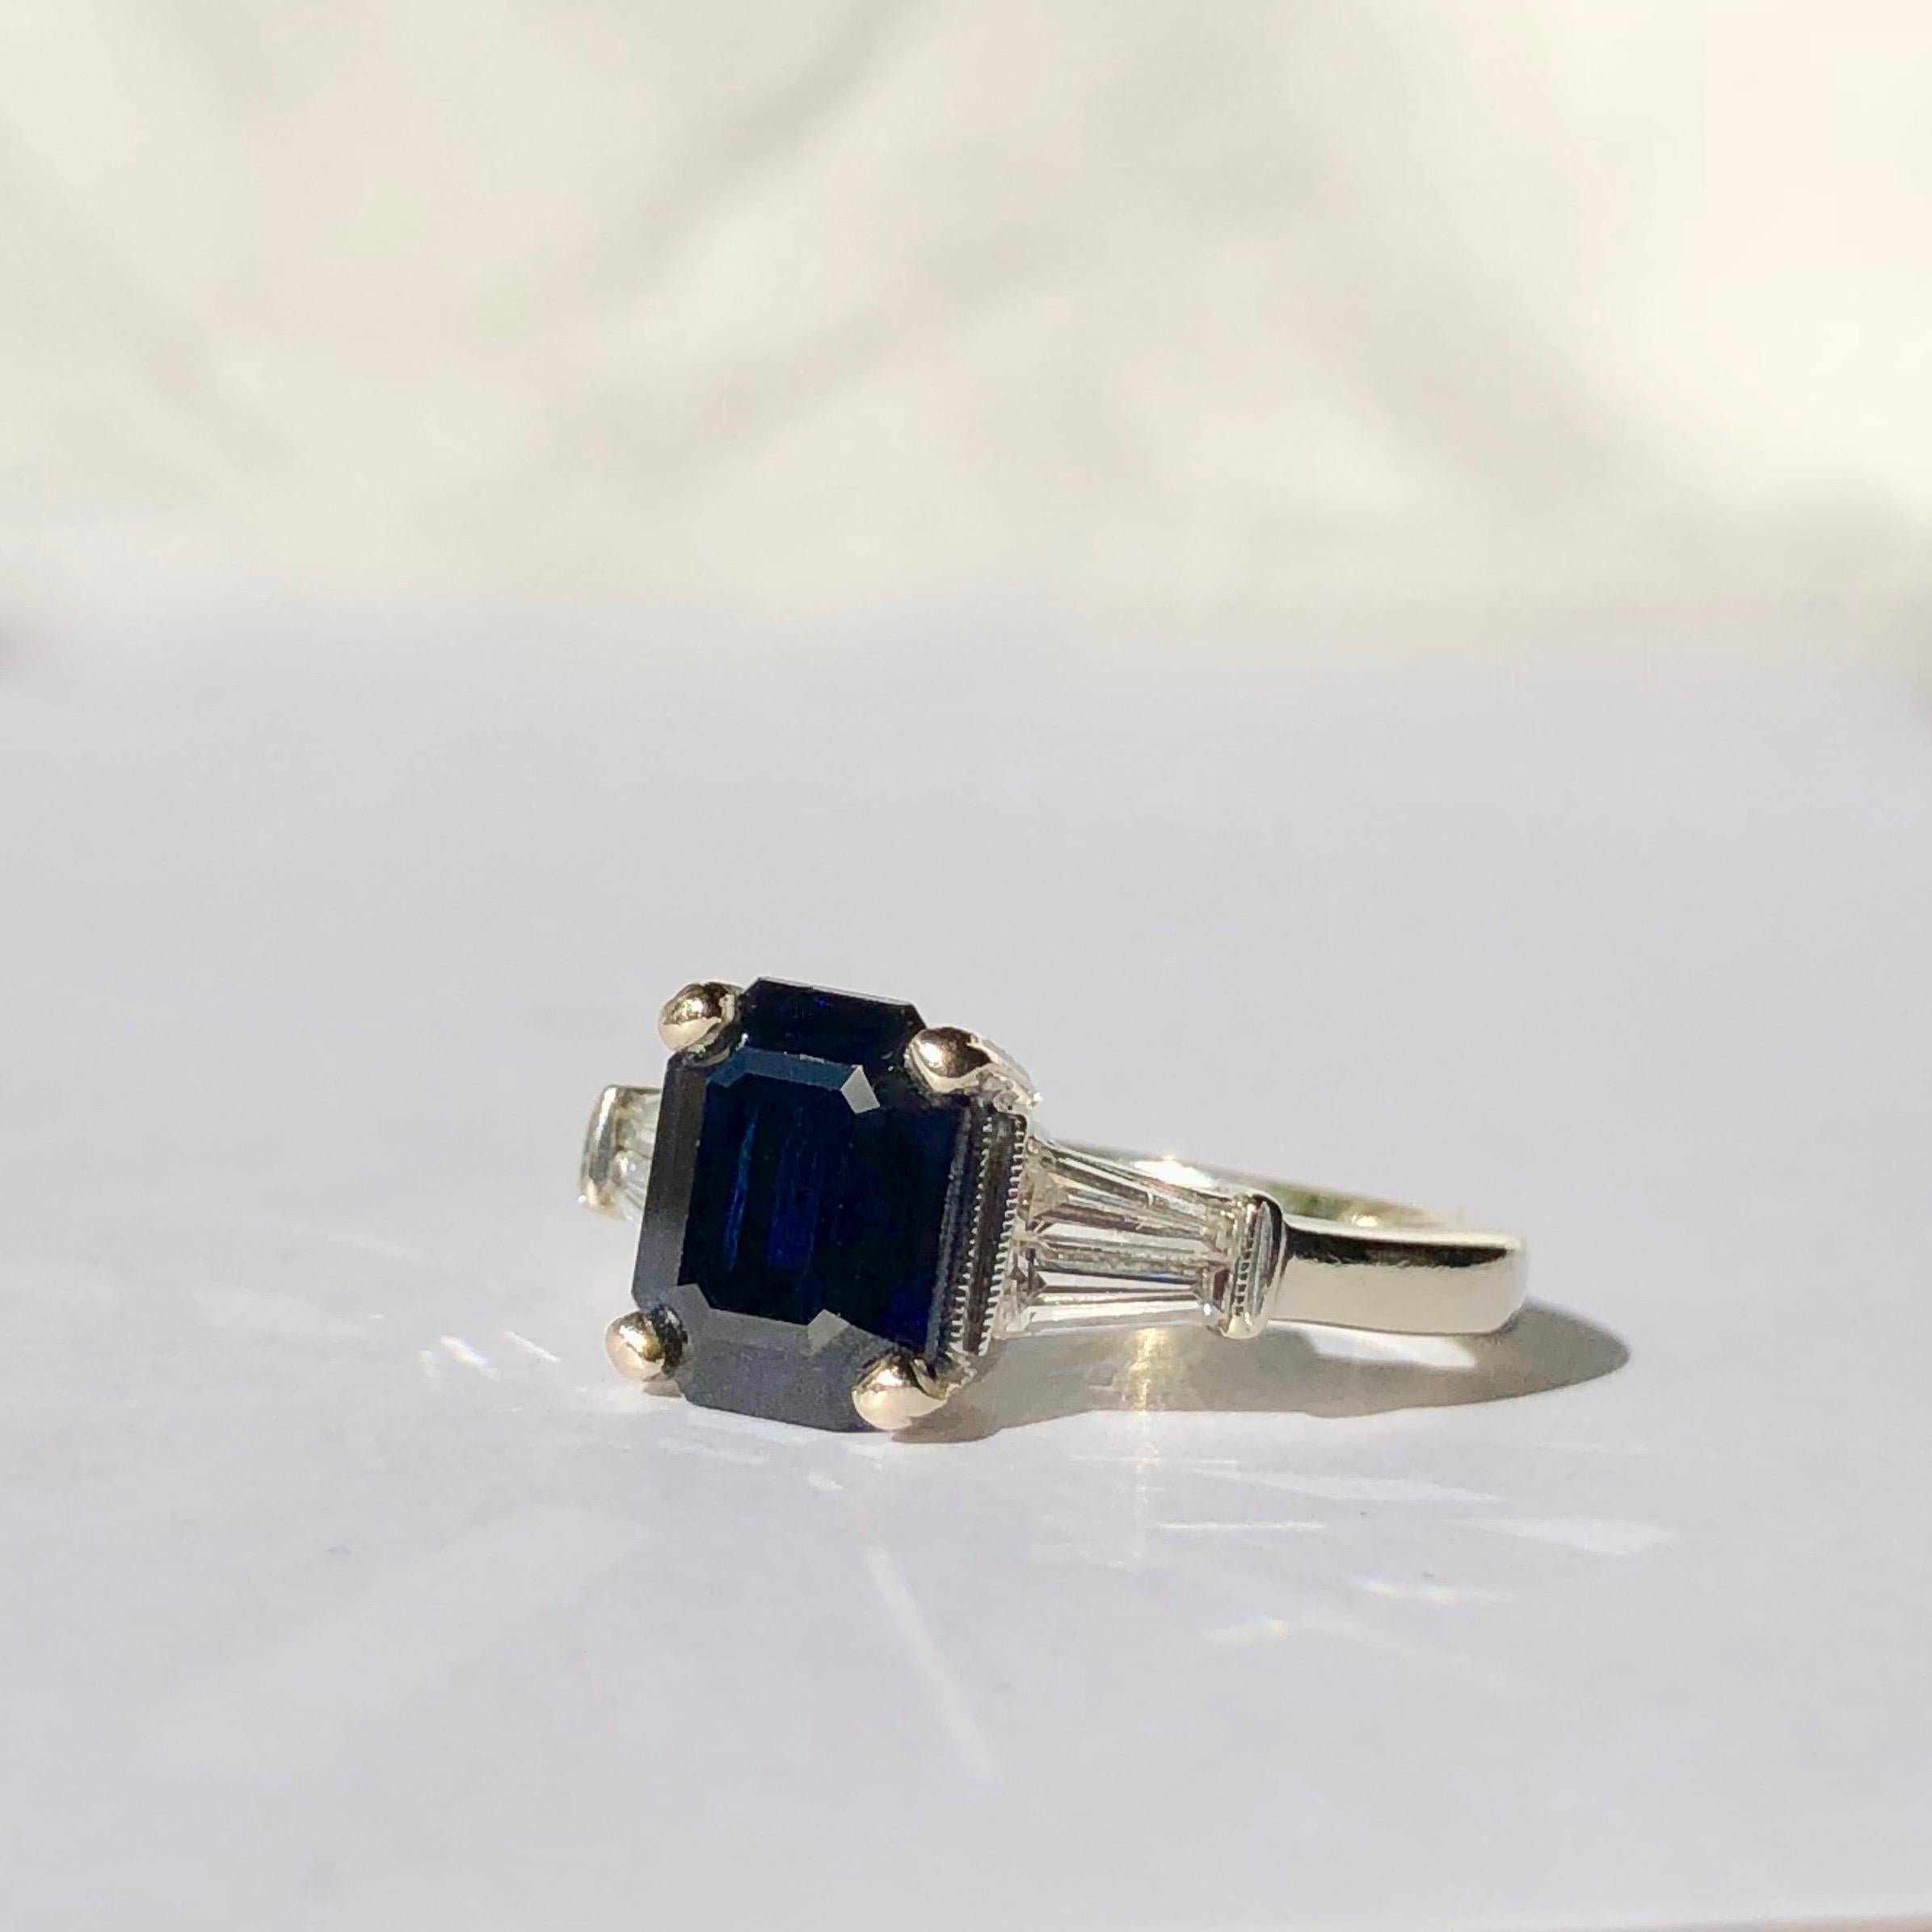 An Emerald Step Cut Midnight Blue Sapphire vintage C1980-90's 

A deep blue hue sapphire set in a classic, elegant style mount fashion from polished 18k white gold with white tapered baguette shoulders

The beautiful white diamonds are and estimated